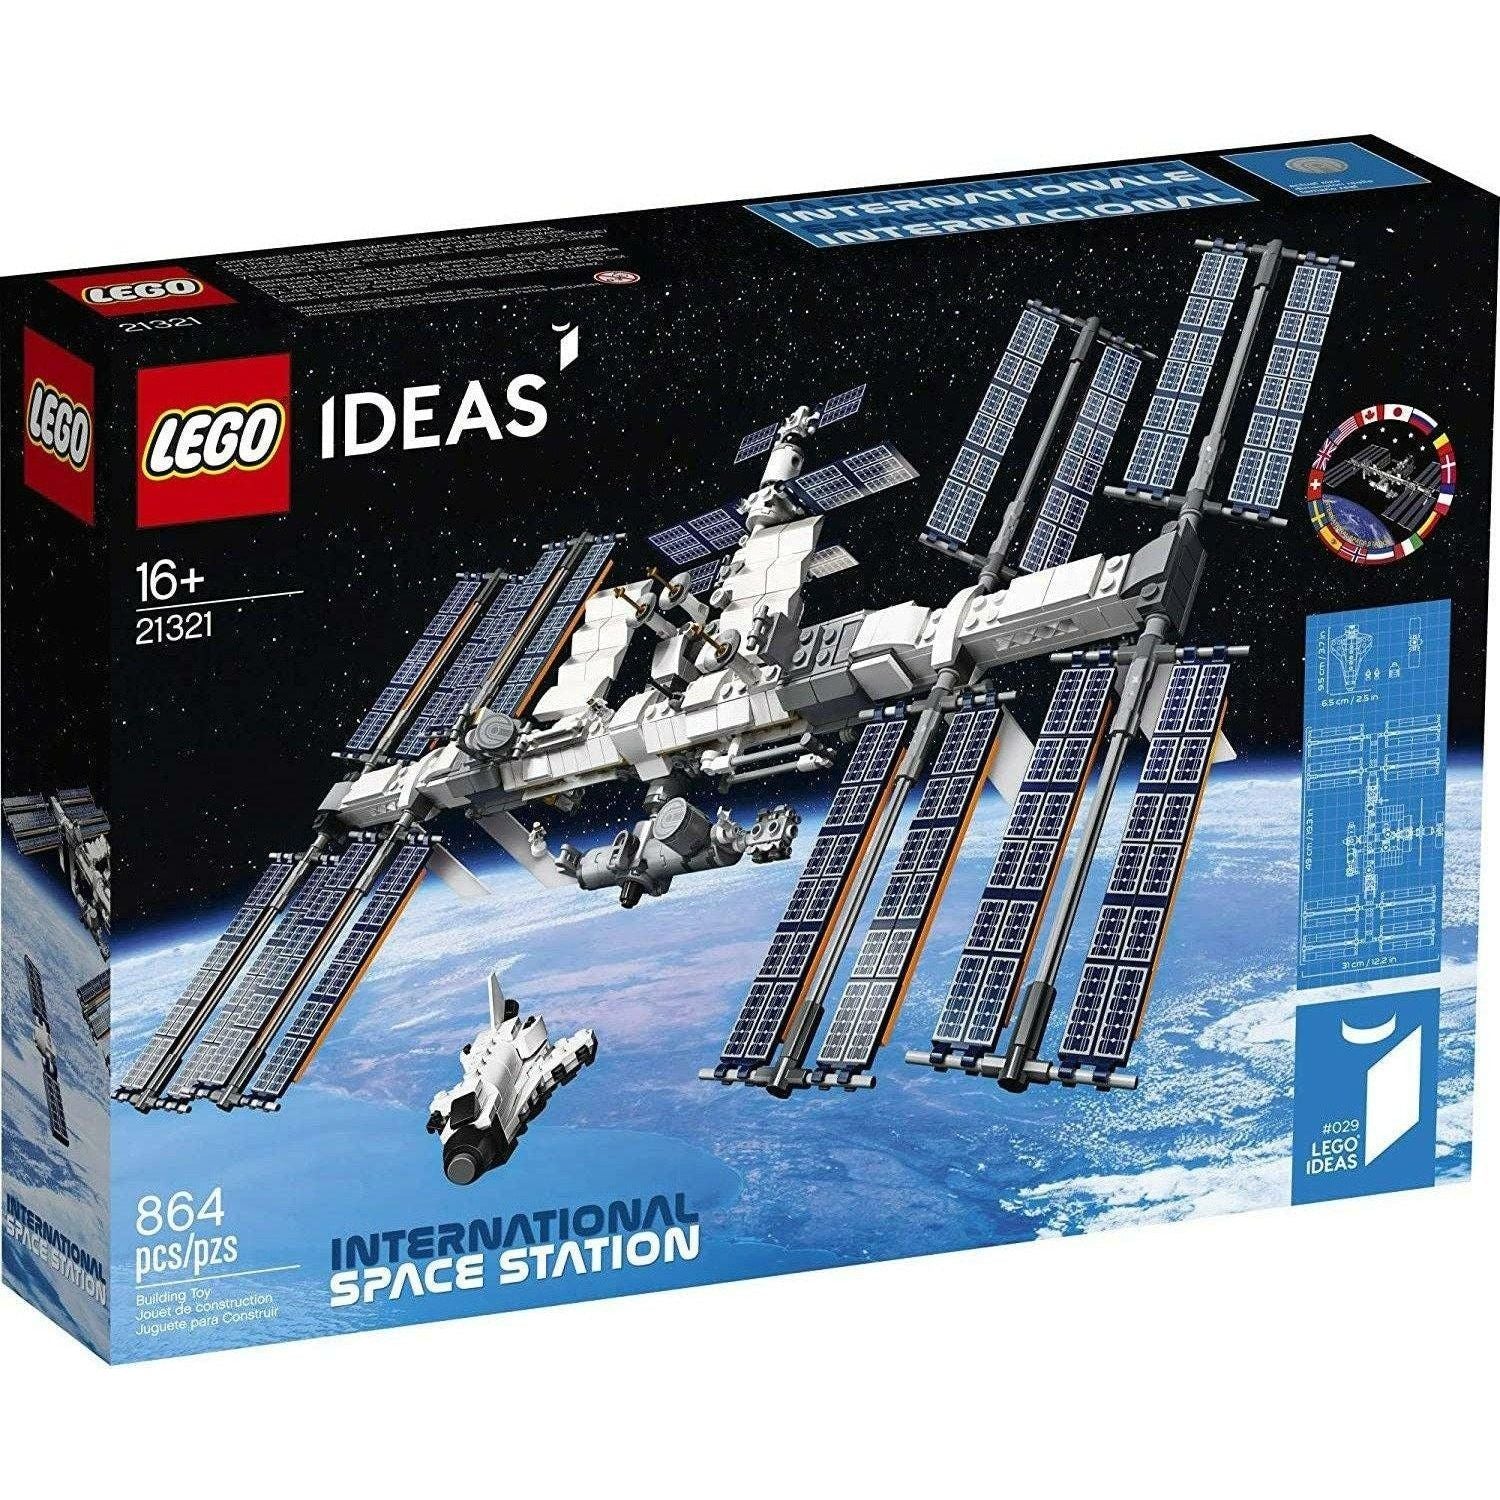 LEGO Ideas International Space Station 21321 Building Kit, Adult Set for Display, Makes a Great Birthday Present (864 Pieces) - BumbleToys - 8-13 Years, Boys, Ideas, LEGO, OXE, Pre-Order